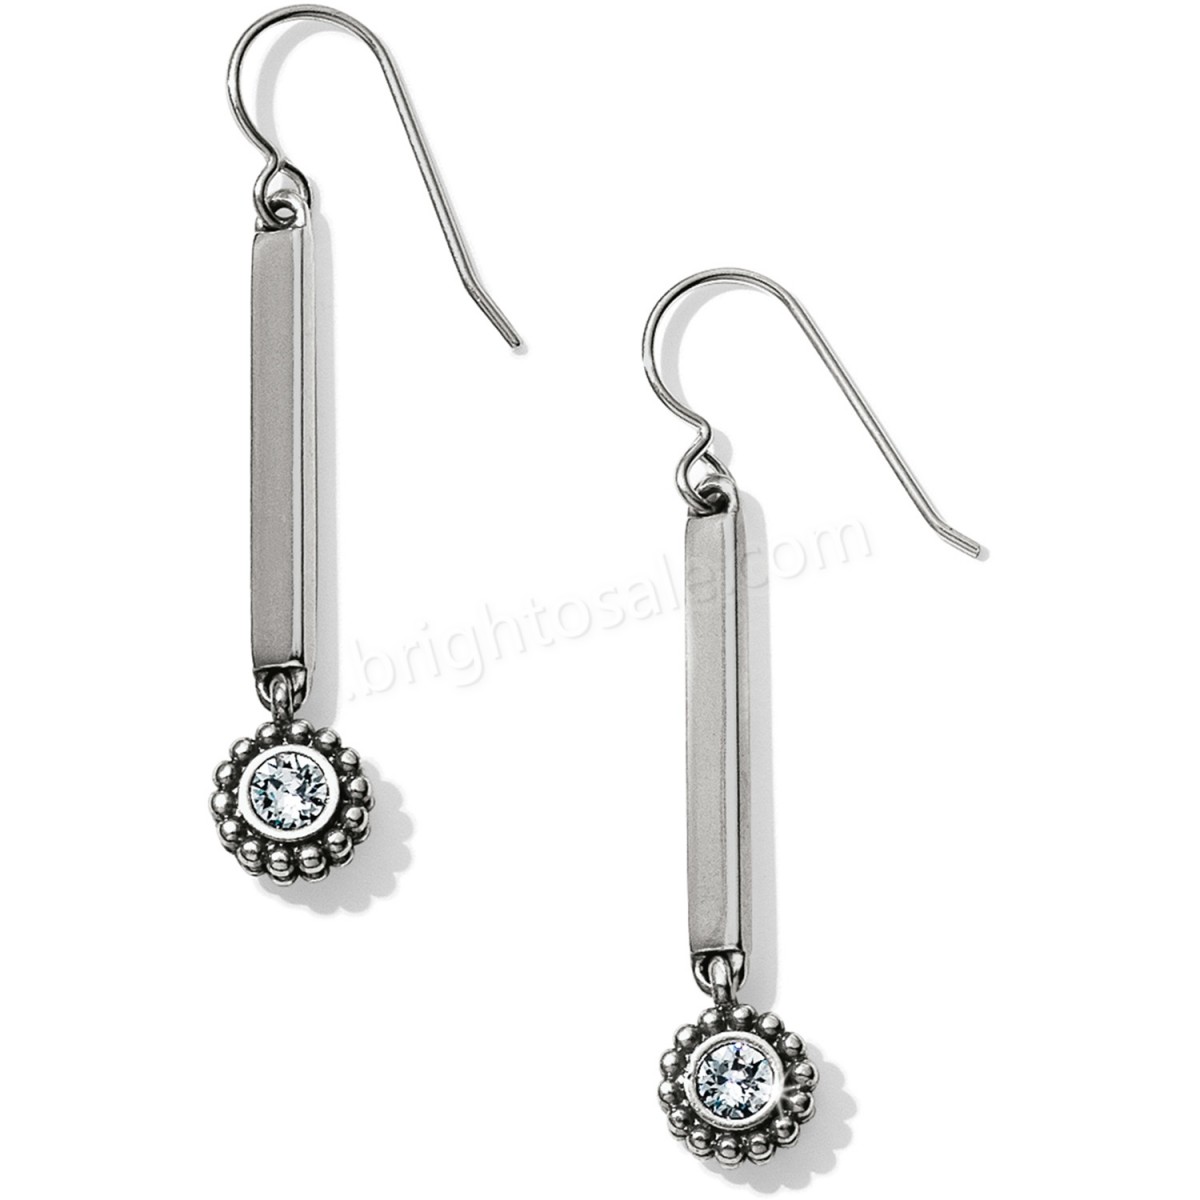 Brighton Collectibles & Online Discount Nadia Post Drop Earrings - -0